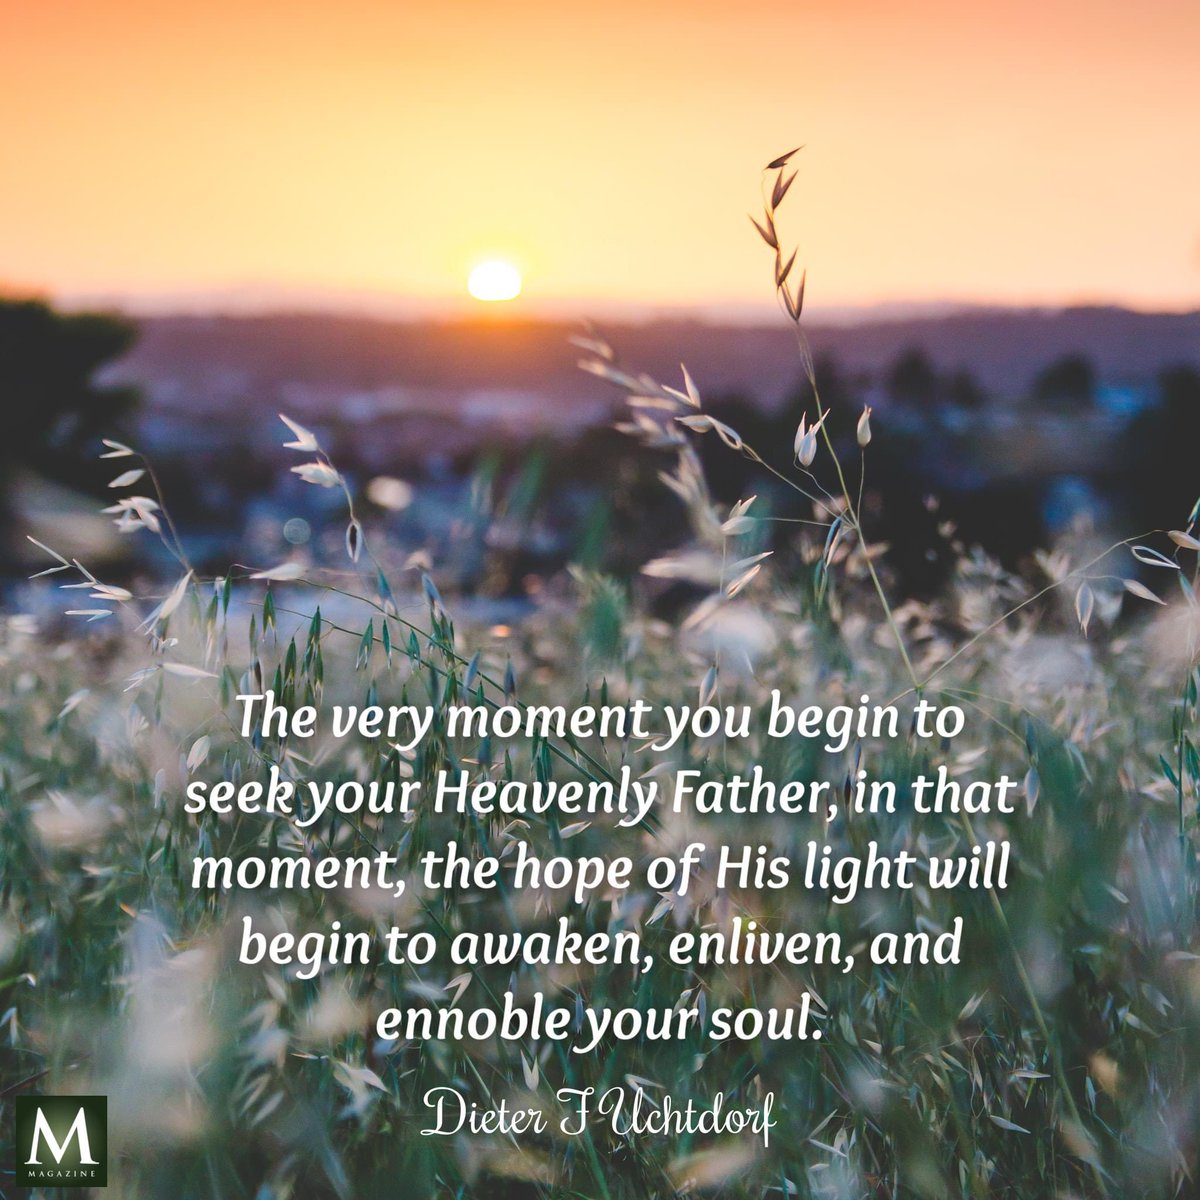 'The very moment you begin to seek your Heavenly Father, in that moment, the hope of His light will begin to awaken, enliven, and ennoble your soul.' ~ Elder Dieter F Uchtdorf 

#TrustGod #CountOnHim #LDSChurch #HearHim #ComeUntoChrist #ShareGoodness #ChildrenOfGod #GodLovesYou